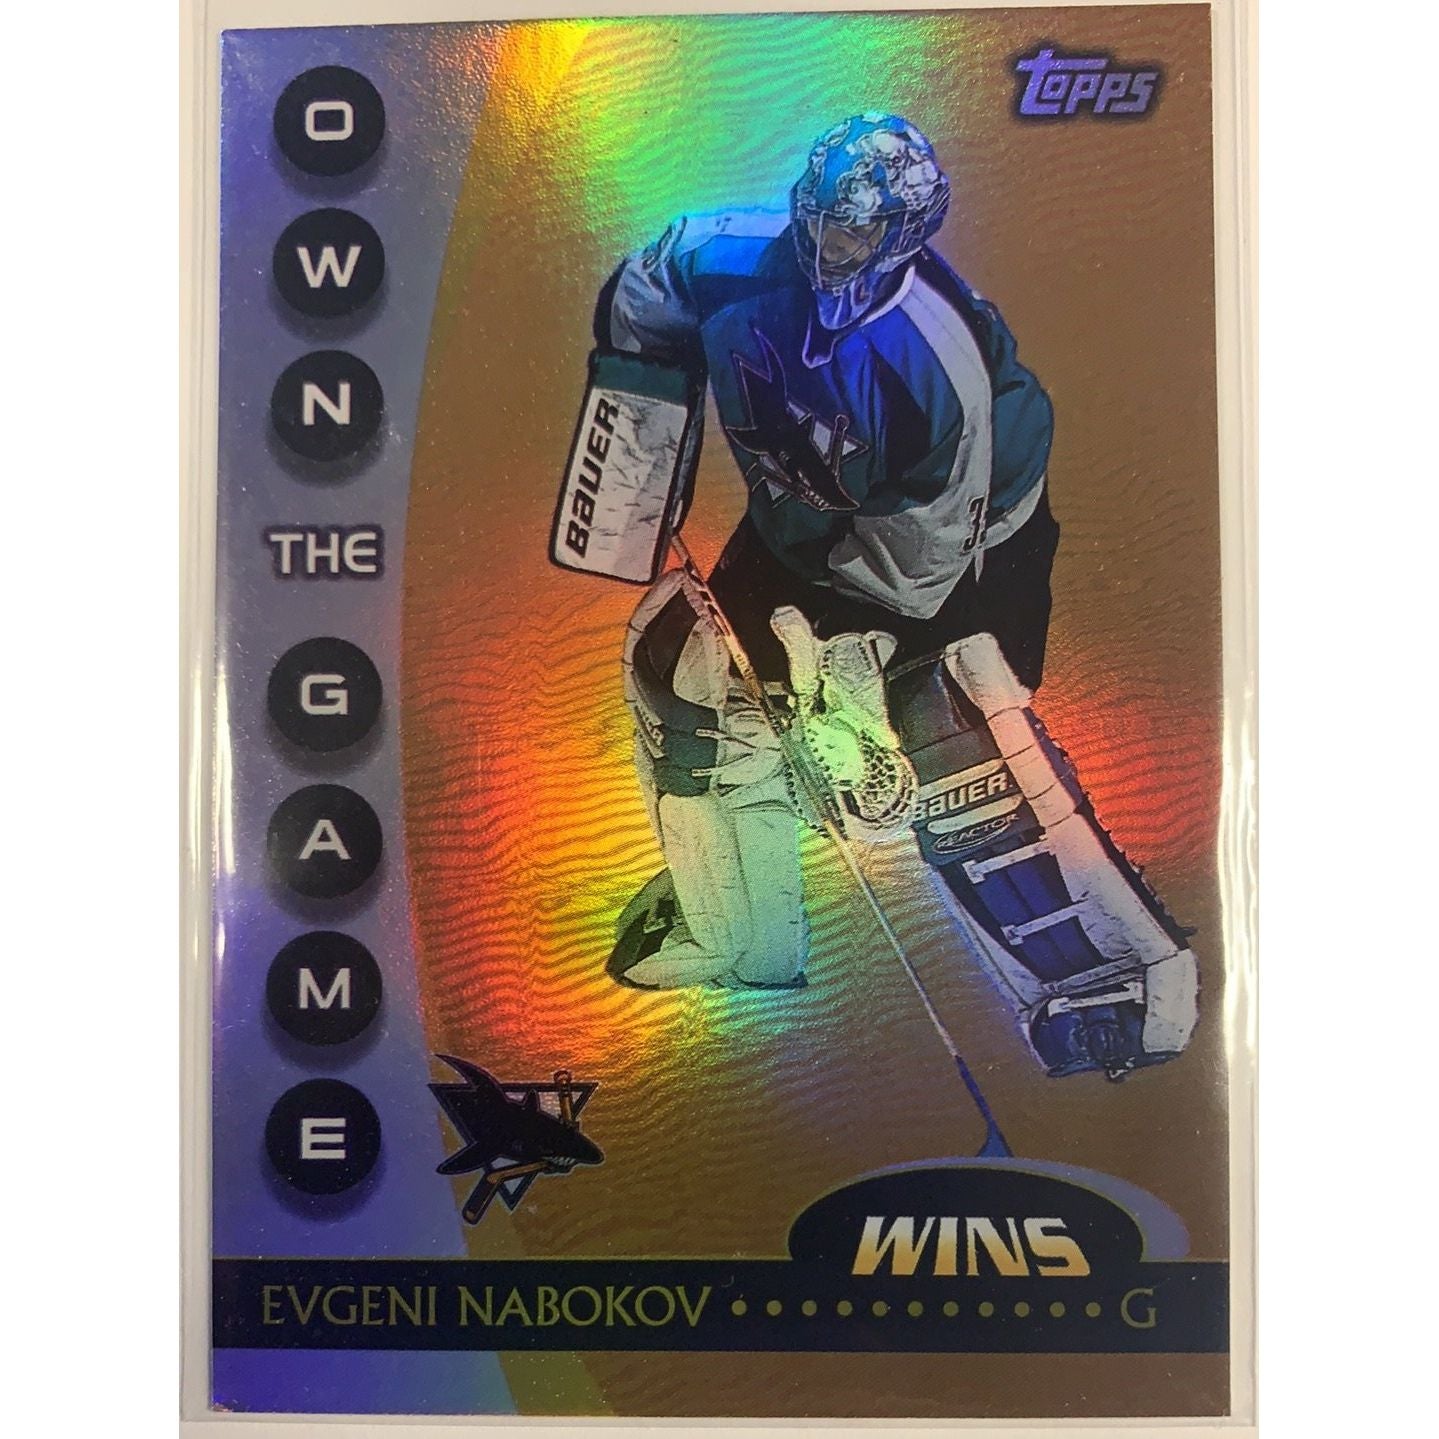  2002 Topps Evgeni Nabokov Own The Game  Local Legends Cards & Collectibles